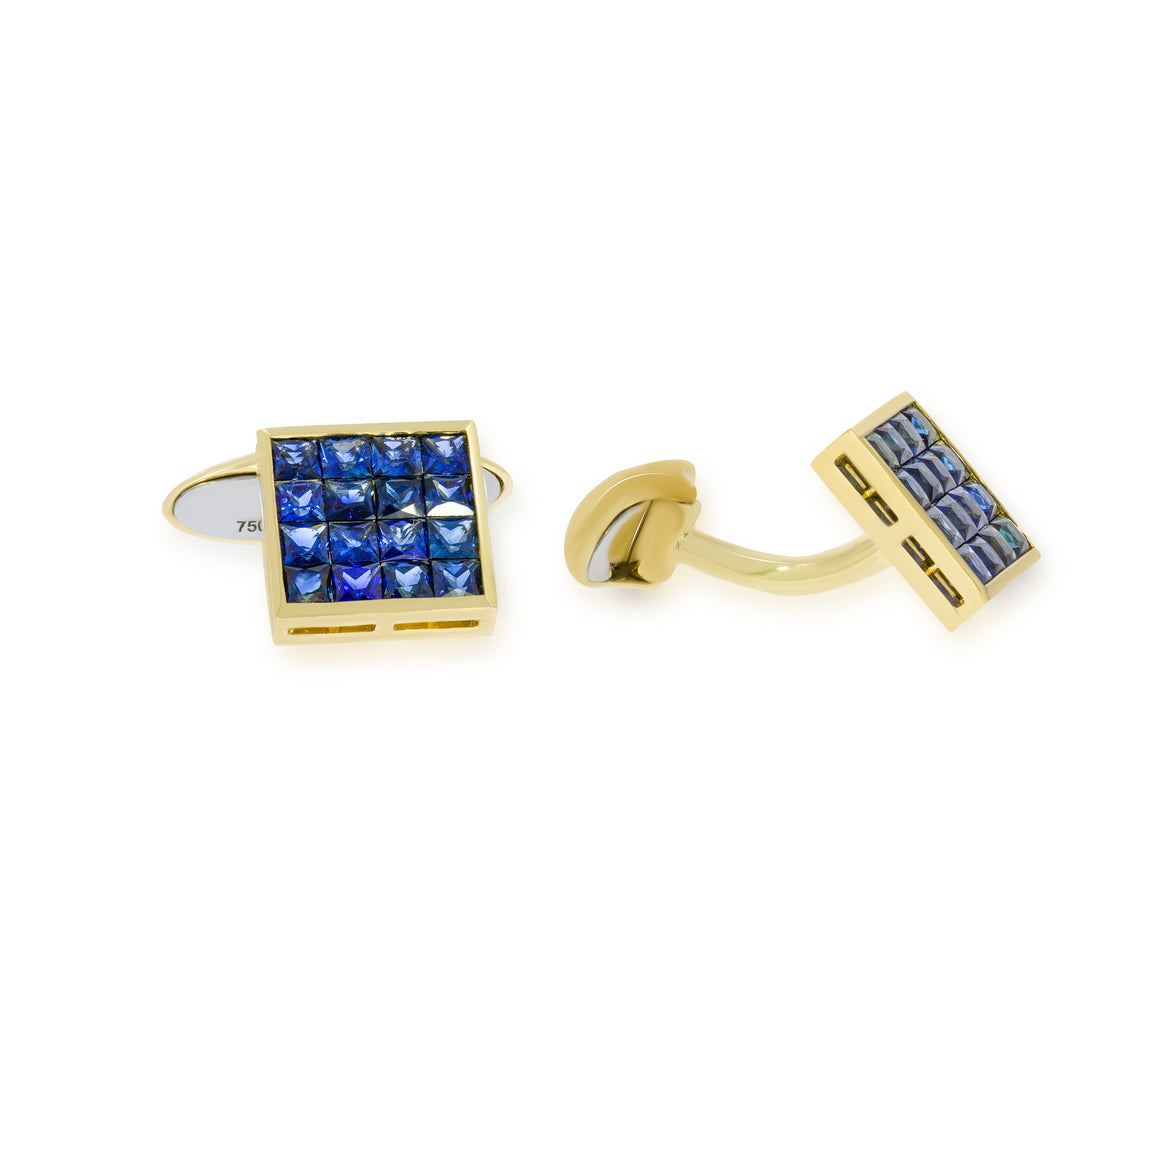 Exceptional Cufflinks blue sapphire Square Cut Invisible Set on 18k yellow gold. Elegant Cufflinks, Perfaect gift for groom.